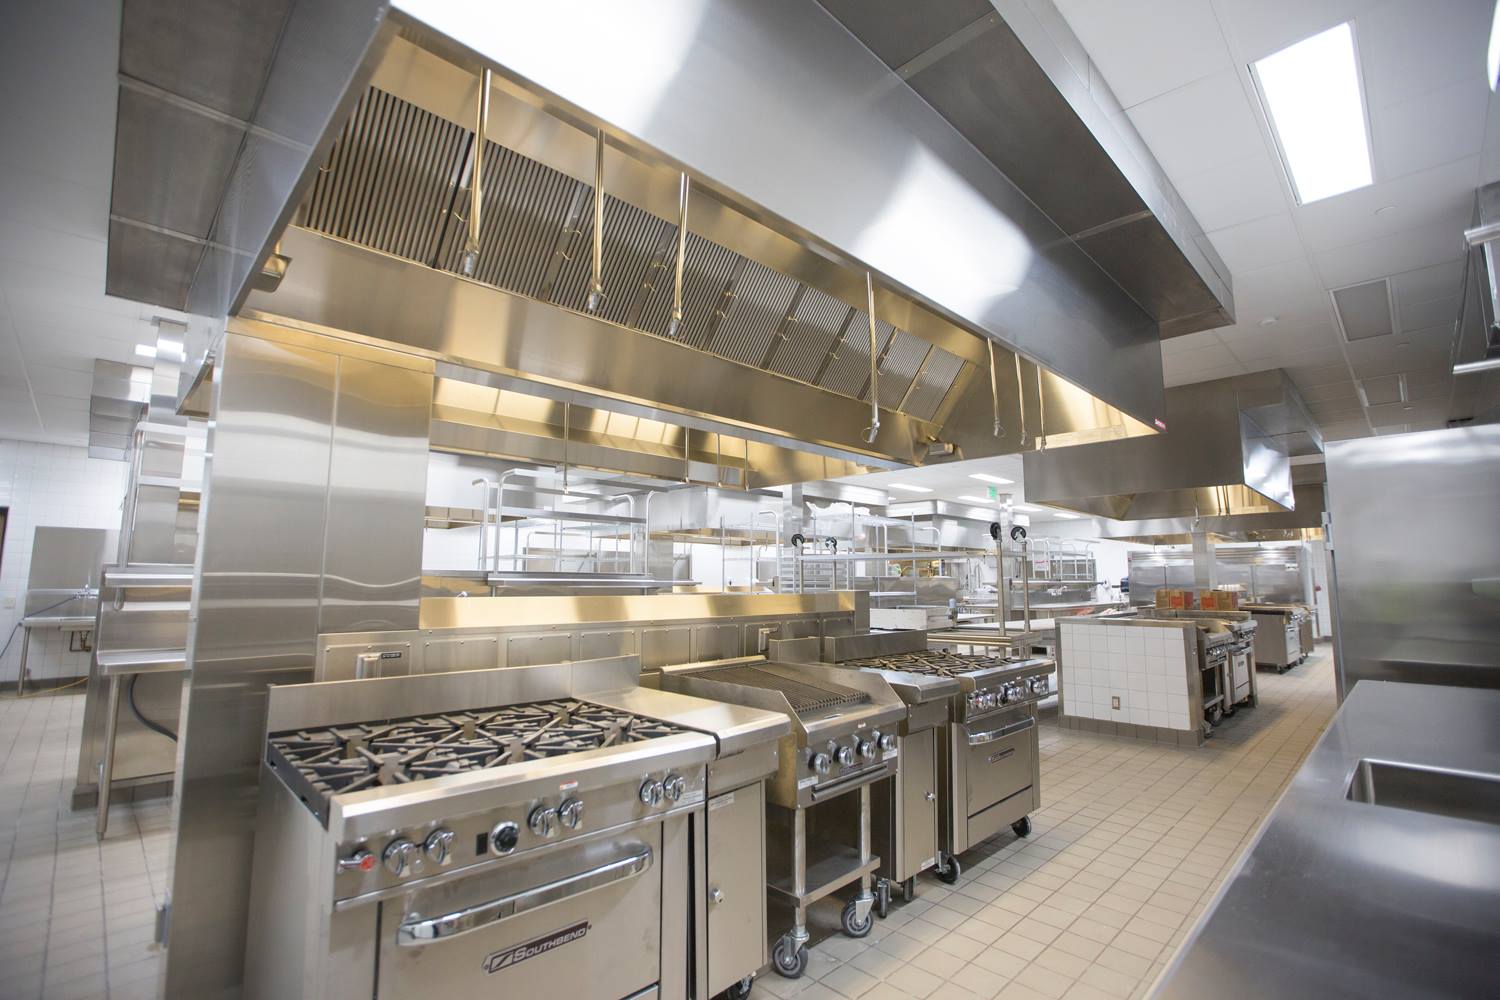 Culinary lab at Madison College